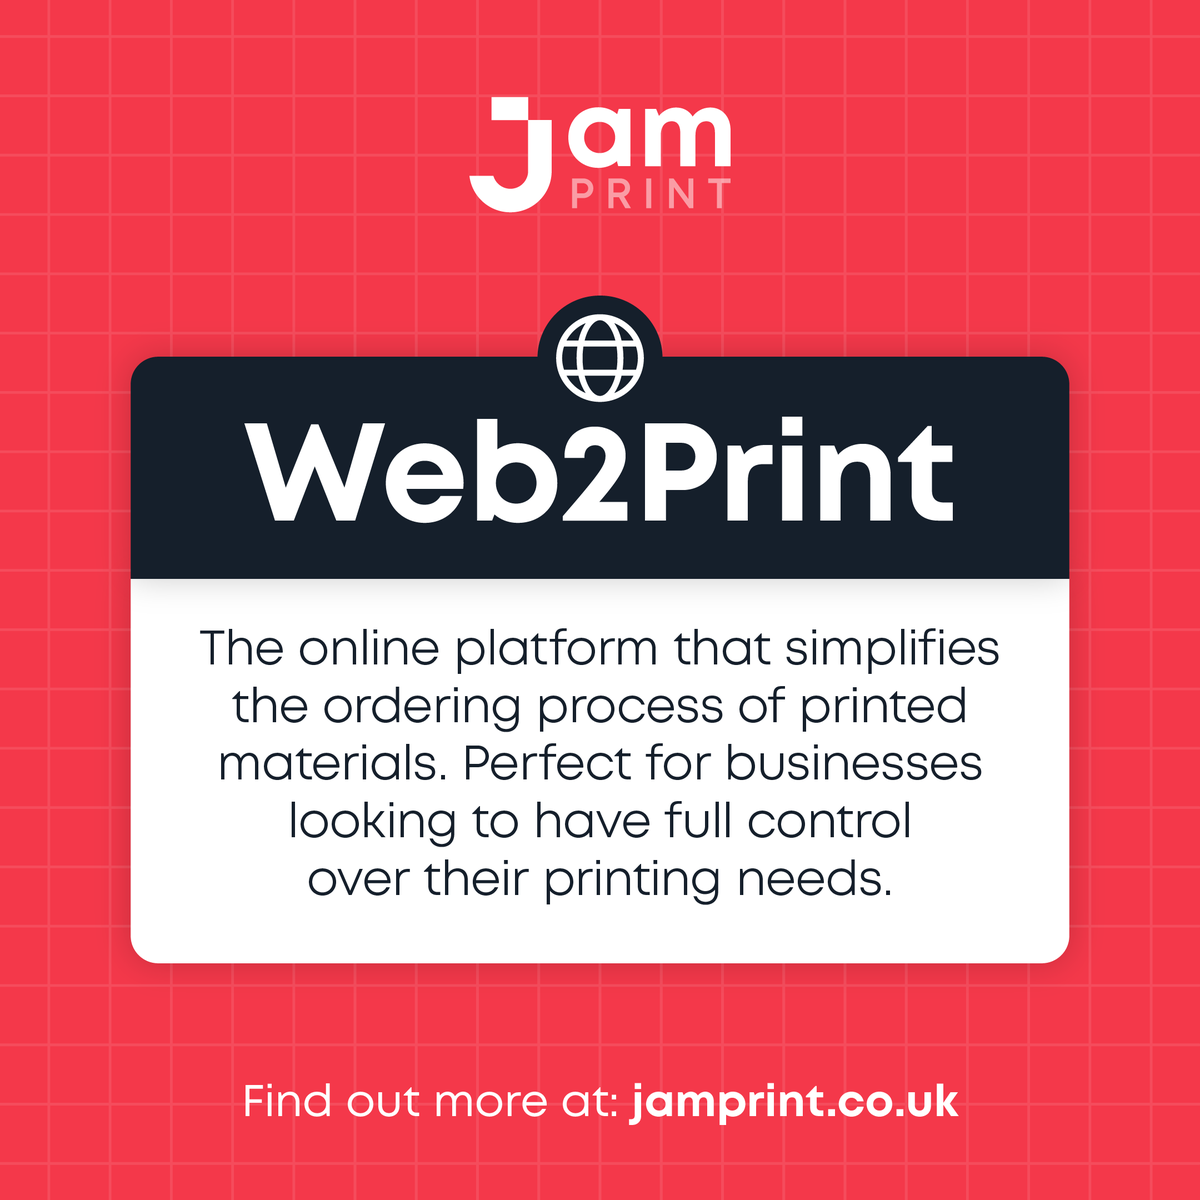 Working to a tight deadline? Require seamless integration of your branded files? Regularly print and reorder? Web2Print is designed for you. Haven't heard of it? You don't want to miss it.

Learn how this platform could transform the way you print here: bit.ly/2XxK93d